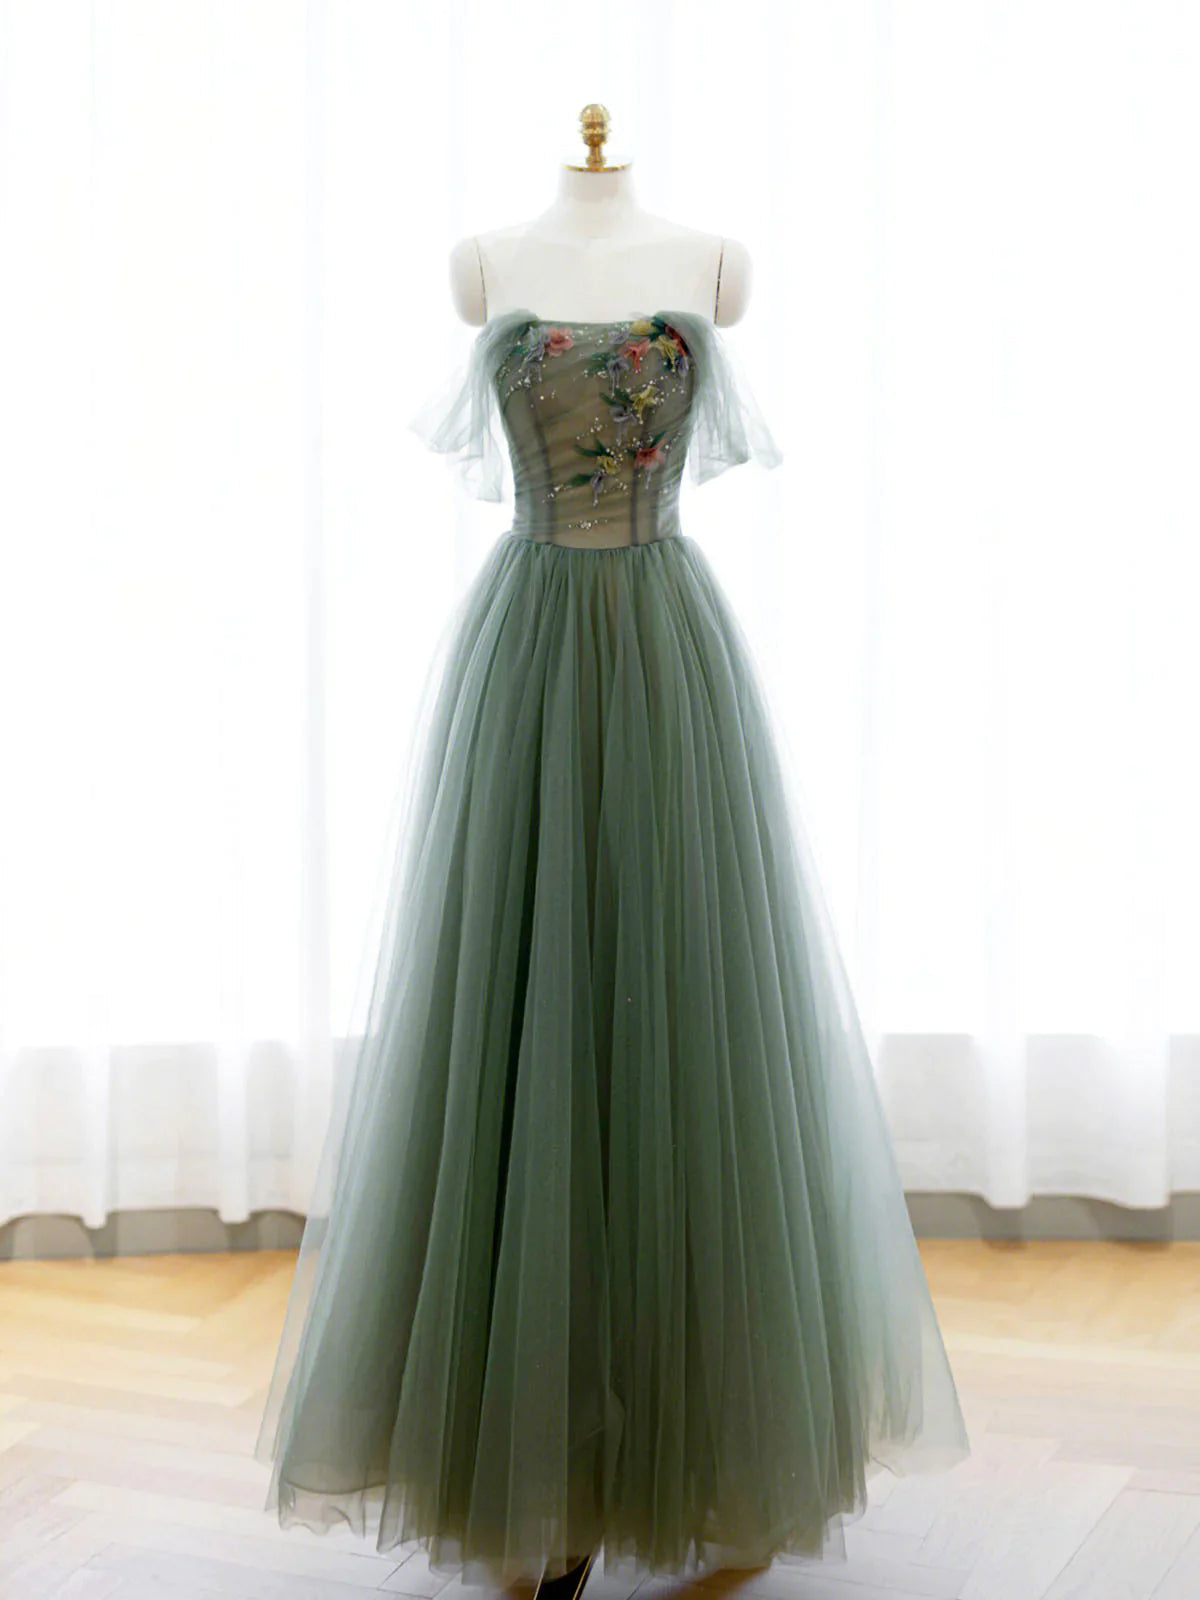 Strapless Green Tulle Floral Long Corset Prom Dresses, Green Tulle Floral Corset Formal Evening Dresses outfit, Wedding Color